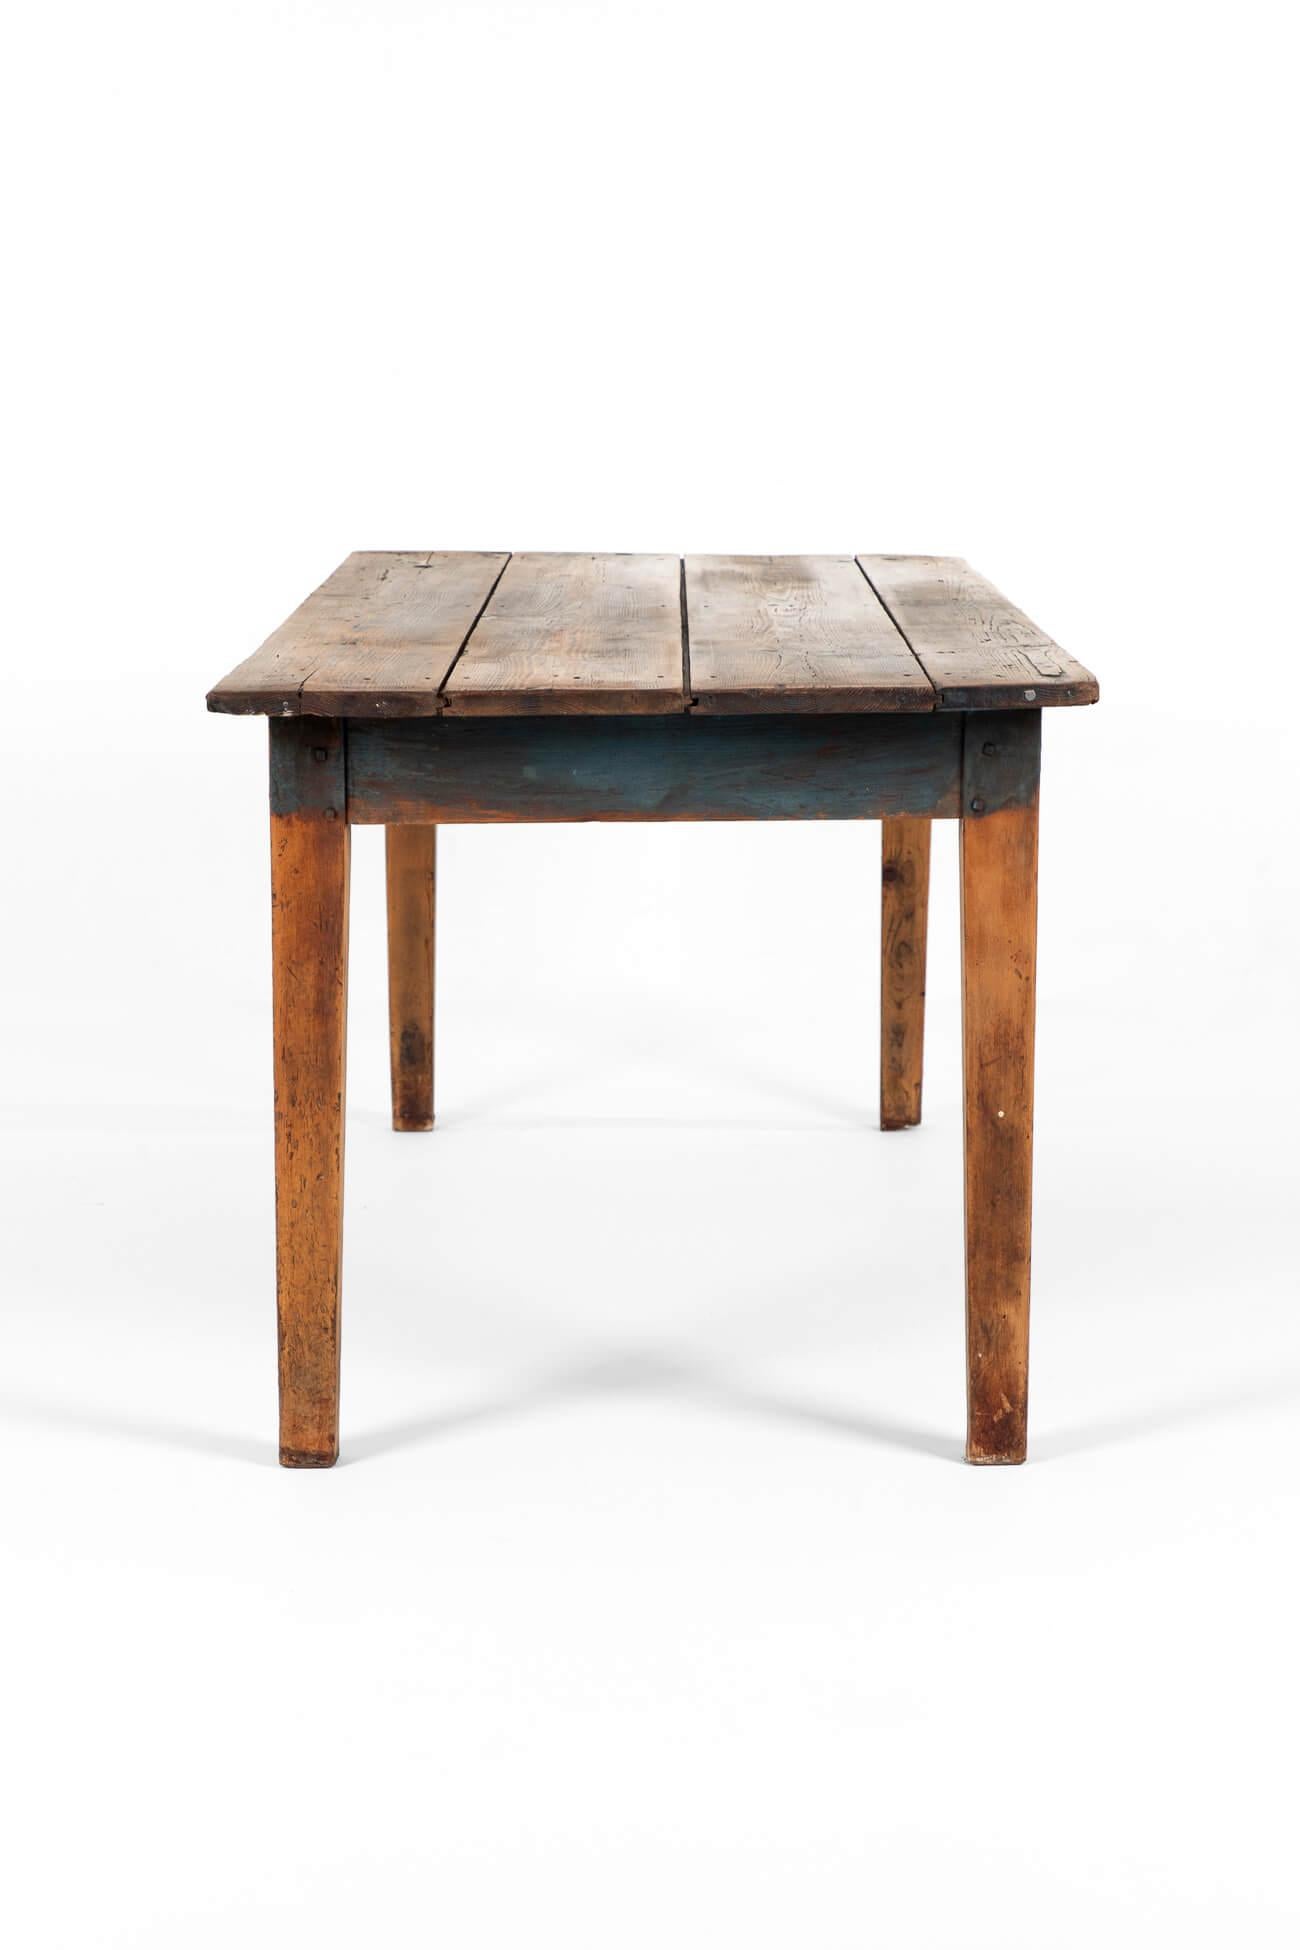 A wonderful English pitch pine farmhouse table.

Generous two-plank top raised on four square legs with traces of original blue paint to the top, apron and legs.

English, circa 1850.

TOTAL

L: 190 CM  L: 74.8 INCHES

W: 79 CM  W: 31.1 INCHES

H: